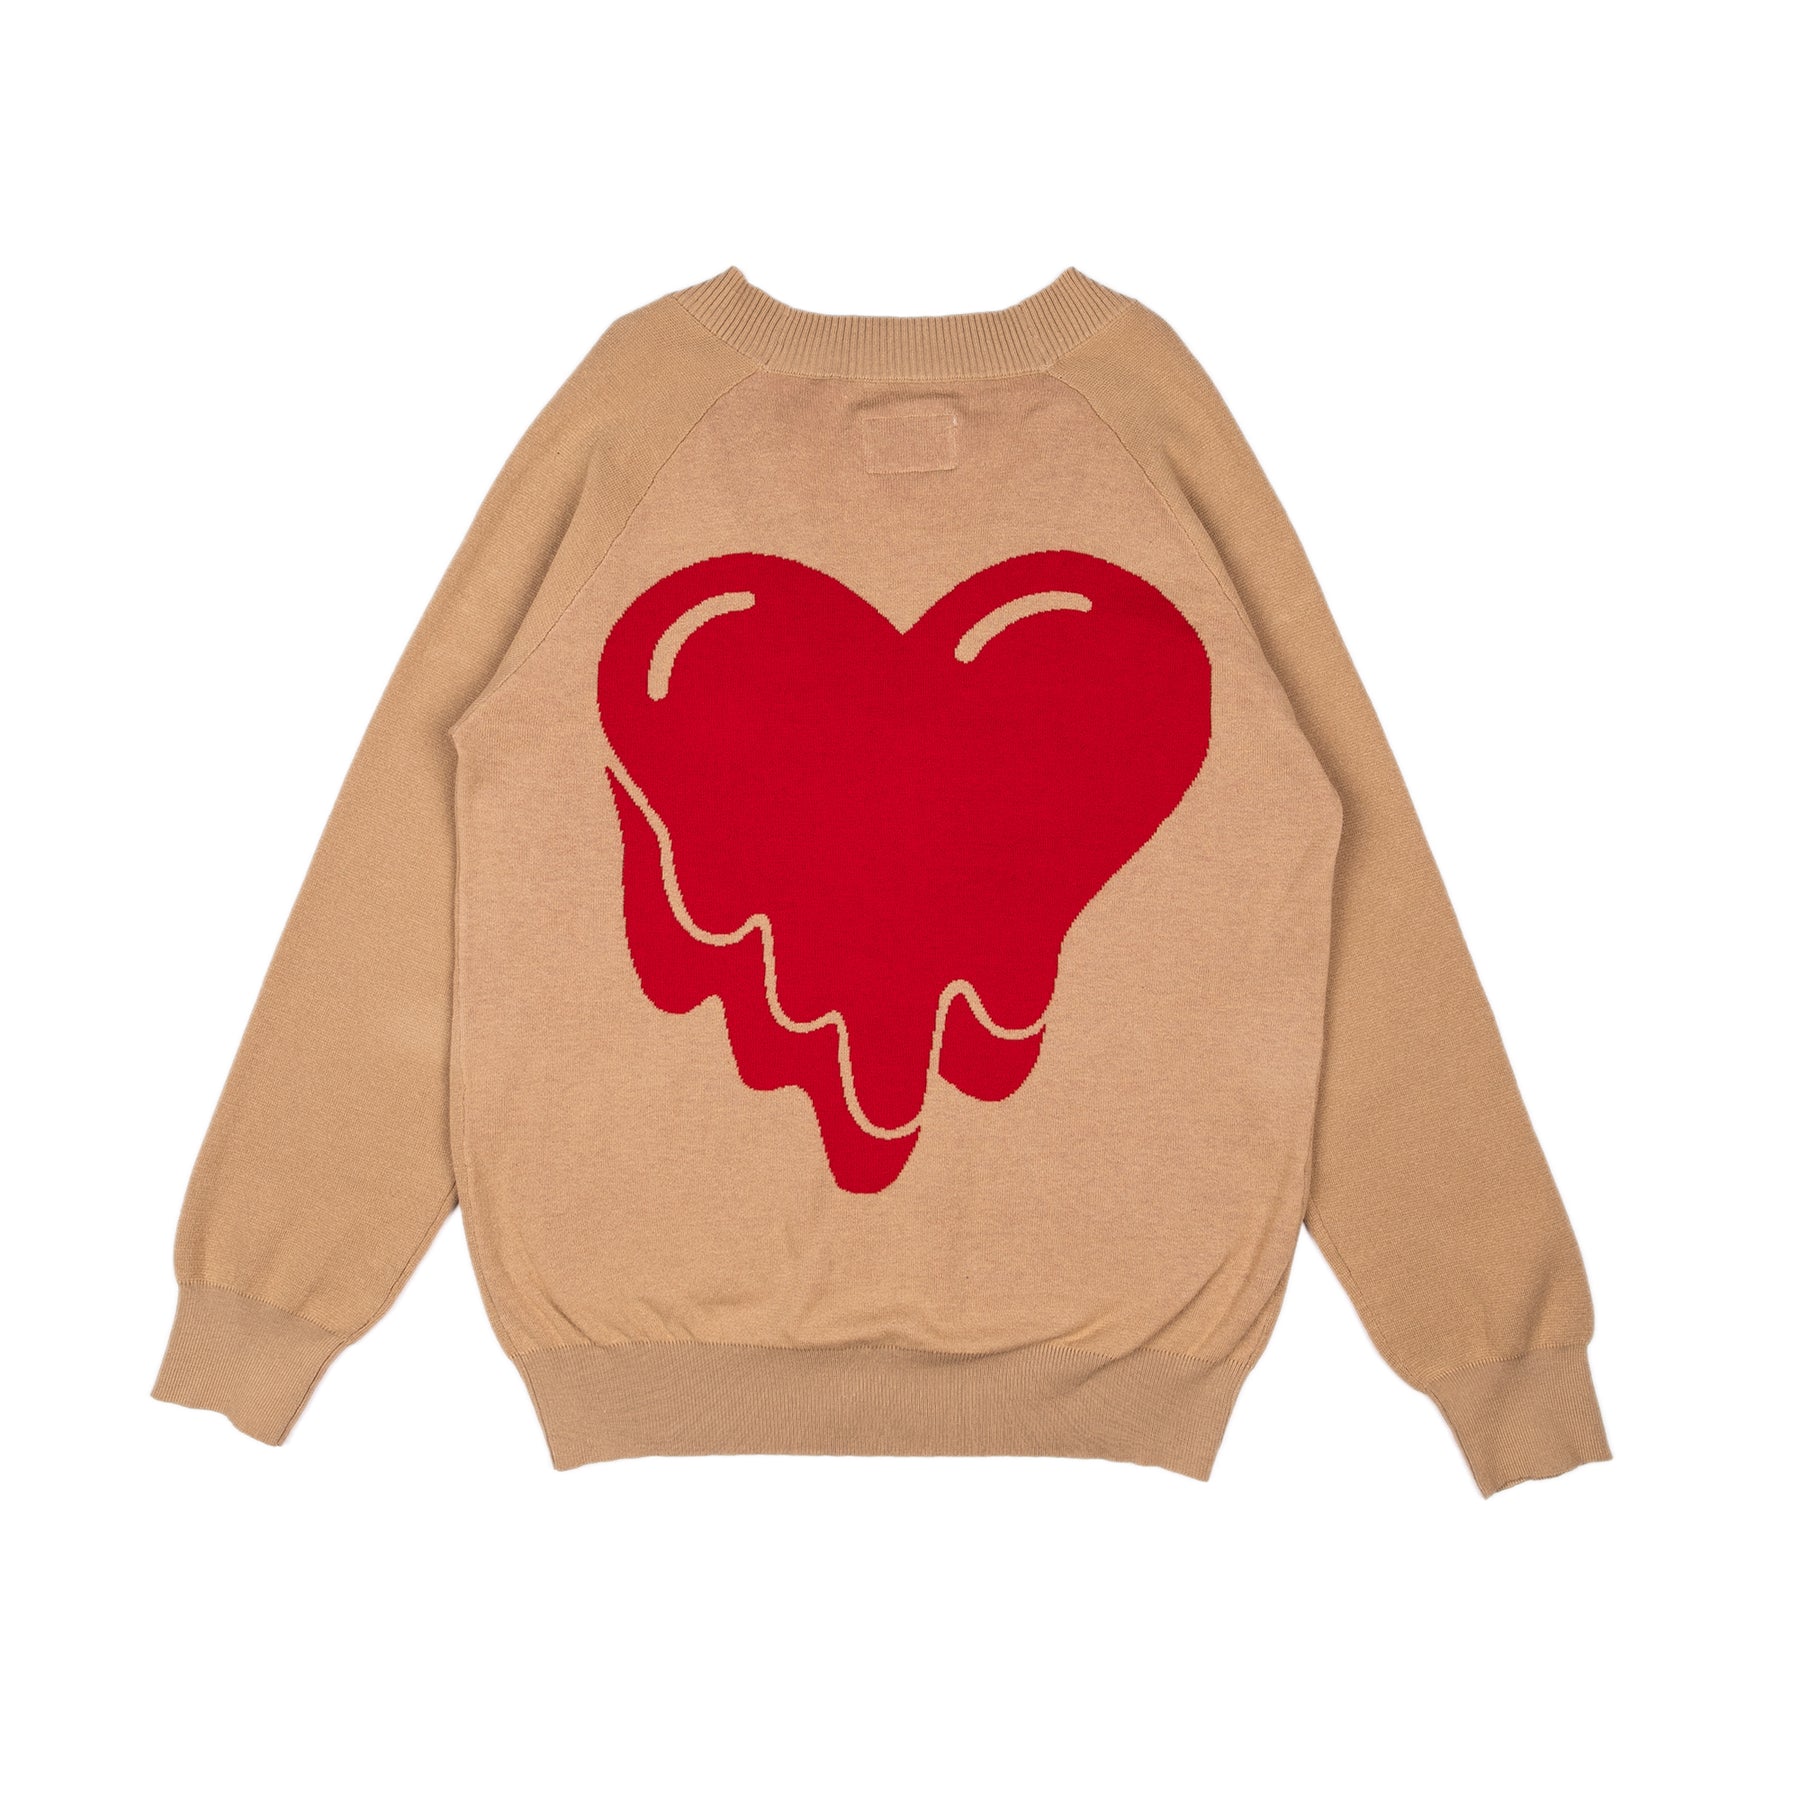 EU HEART CARDIGAN | Why are you here?